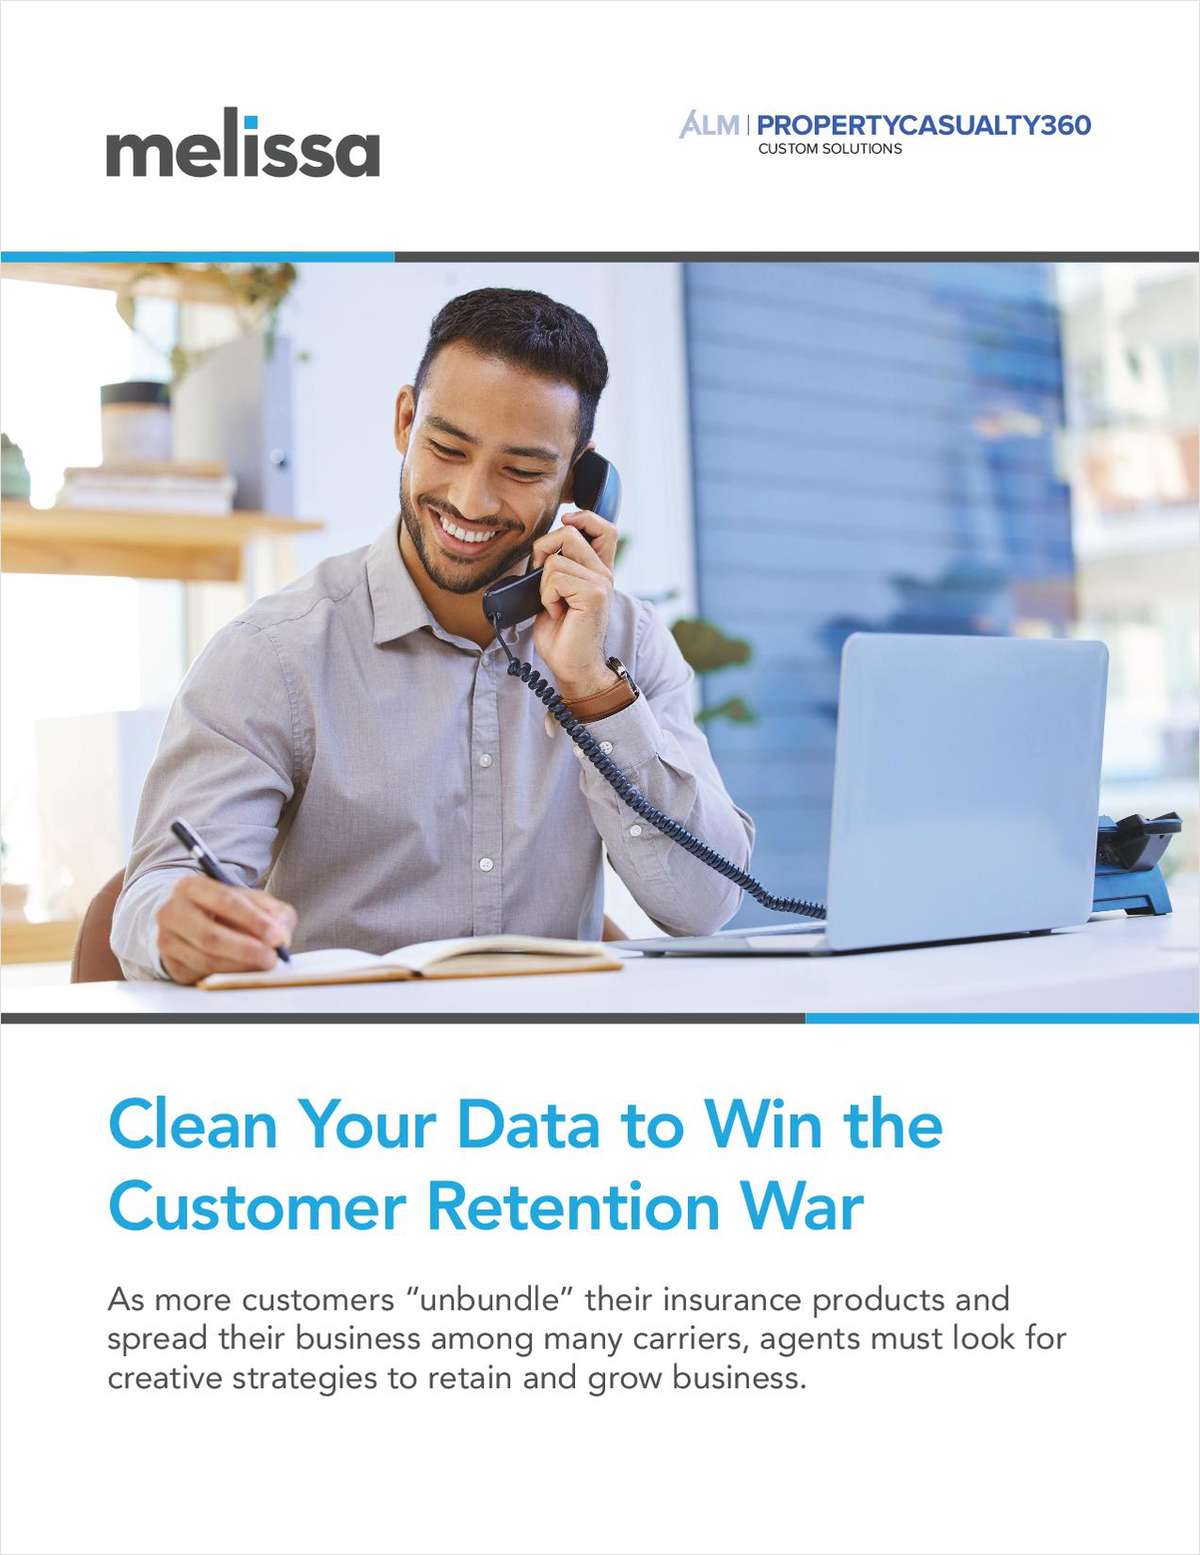 Clean Your Data to Win the Customer Retention War link